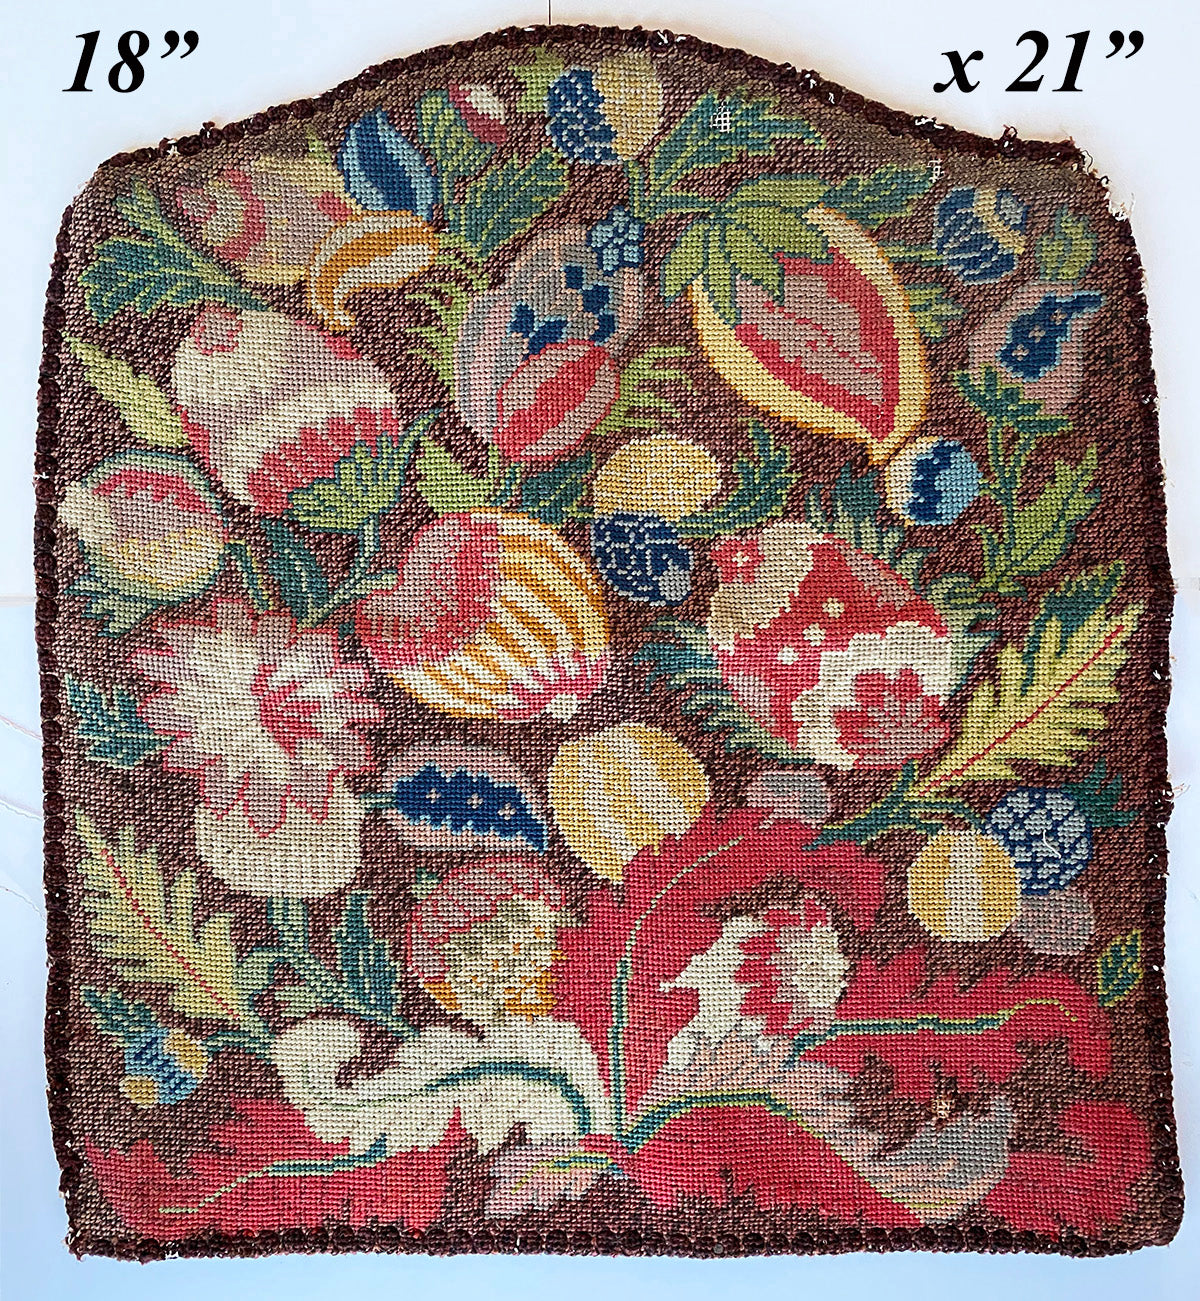 Antique French Needlepoint Chair Back Panel for Bench or Throw Pillow Project, BIG